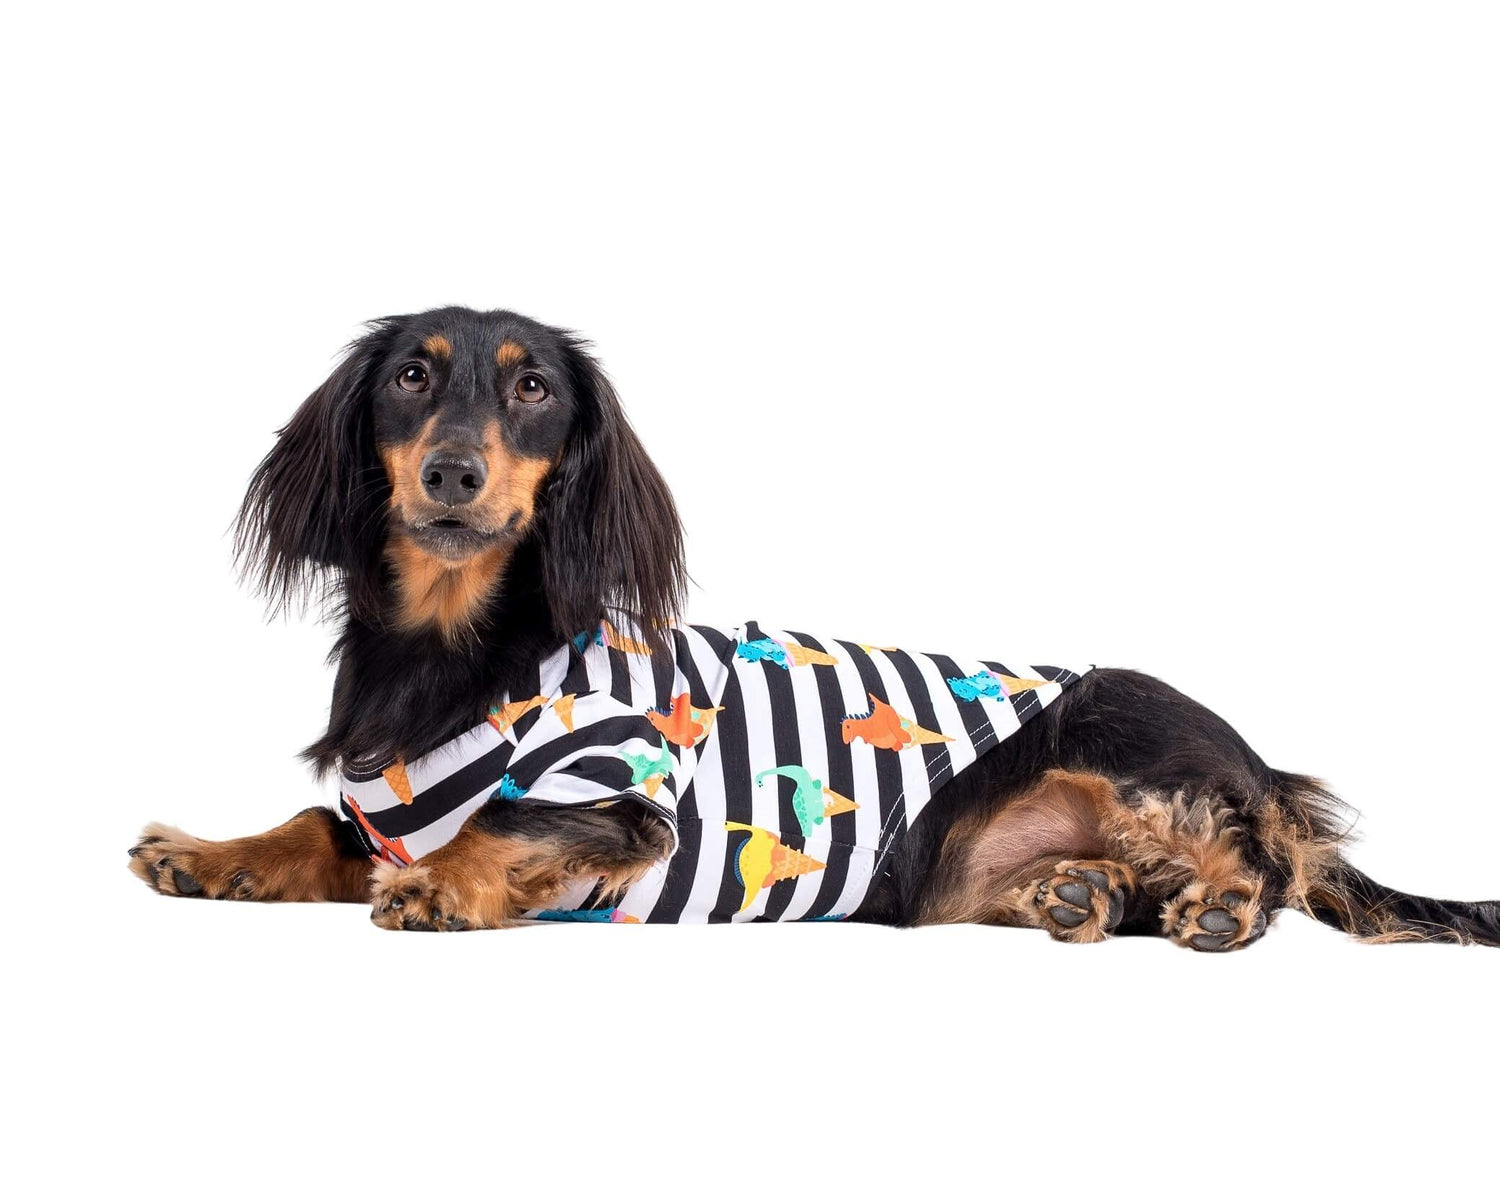 A dachshund laying down. The dog is wearing a Vibrant hound dino-mite dog shirt.